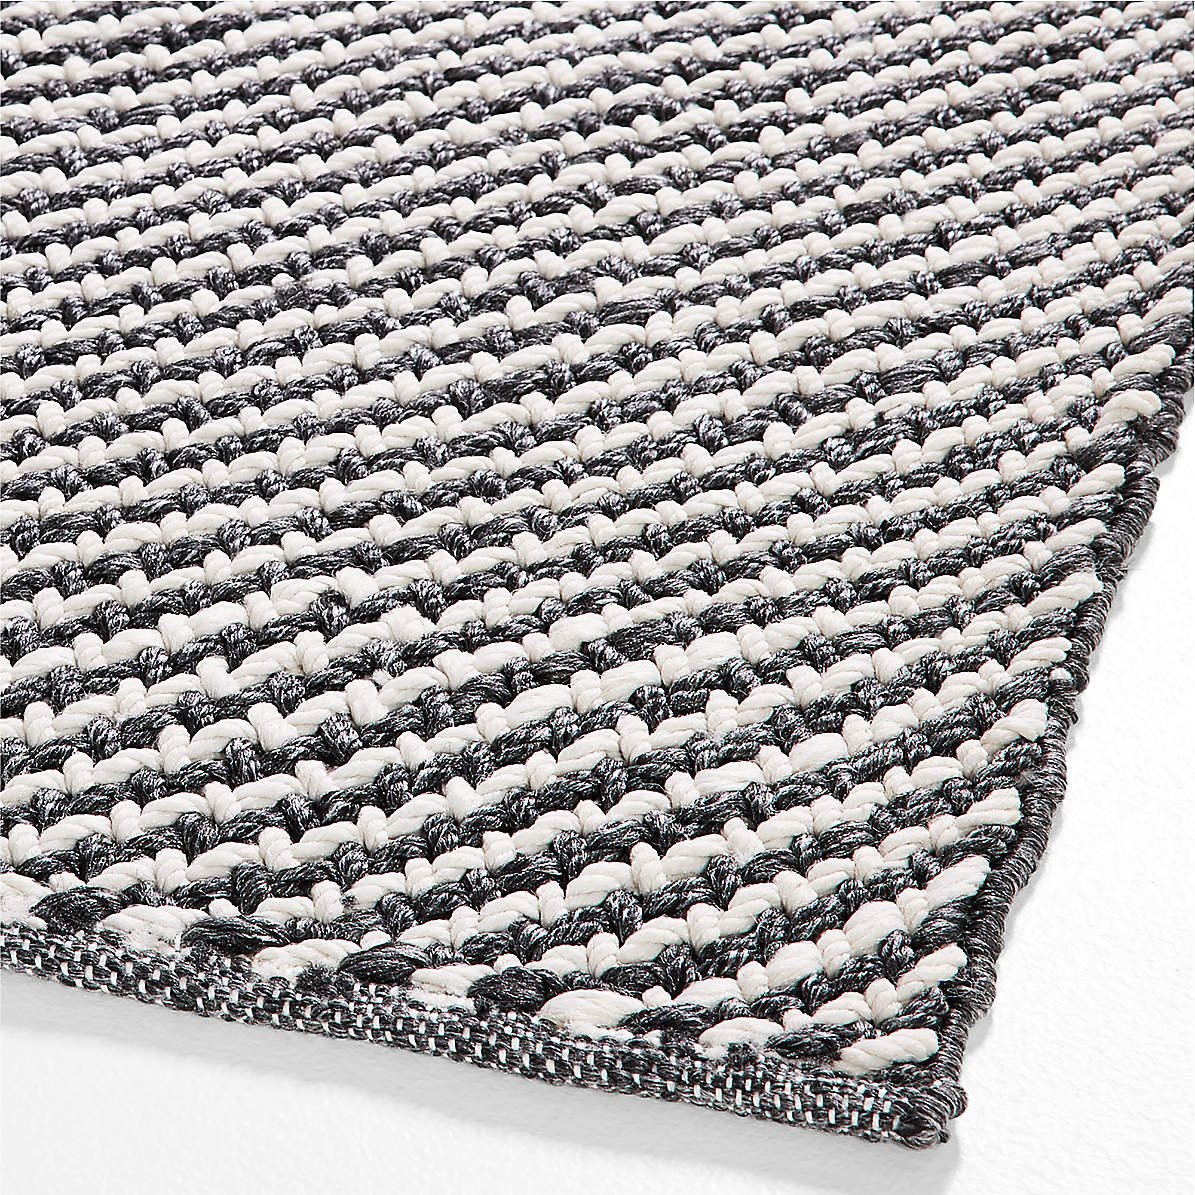 Charcoal Grey Fabric Swatch